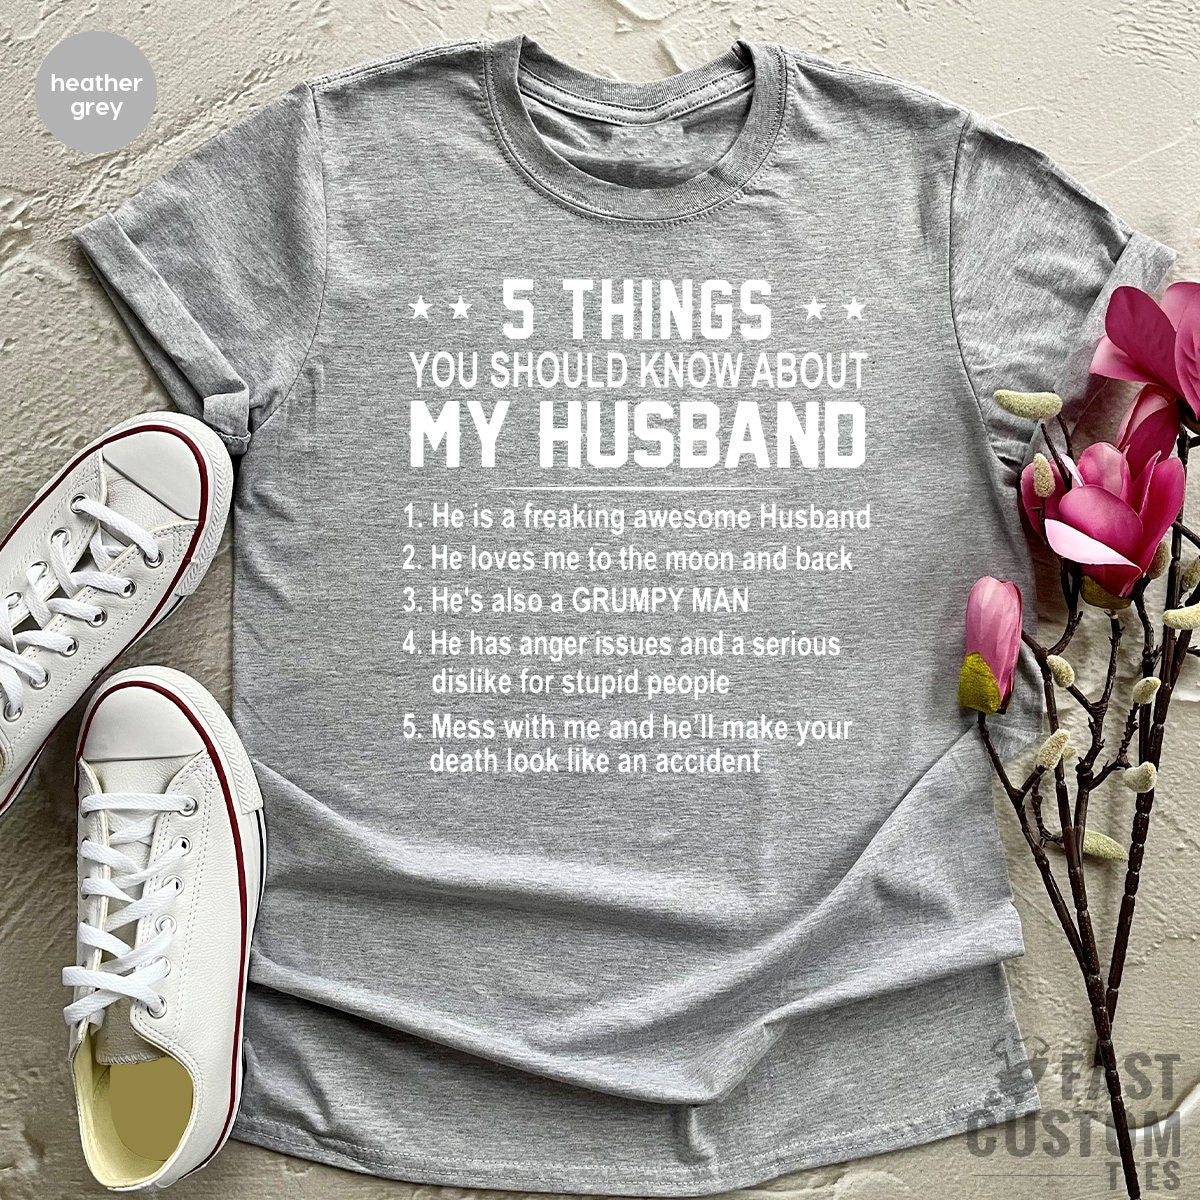 Funny Wife Shirt, Funny Gift For Wife, Wife T Shirt, Best Wife Shirt, 5 Things You Should Know About My Husband T Shirt, Wife Gifts - Fastdeliverytees.com